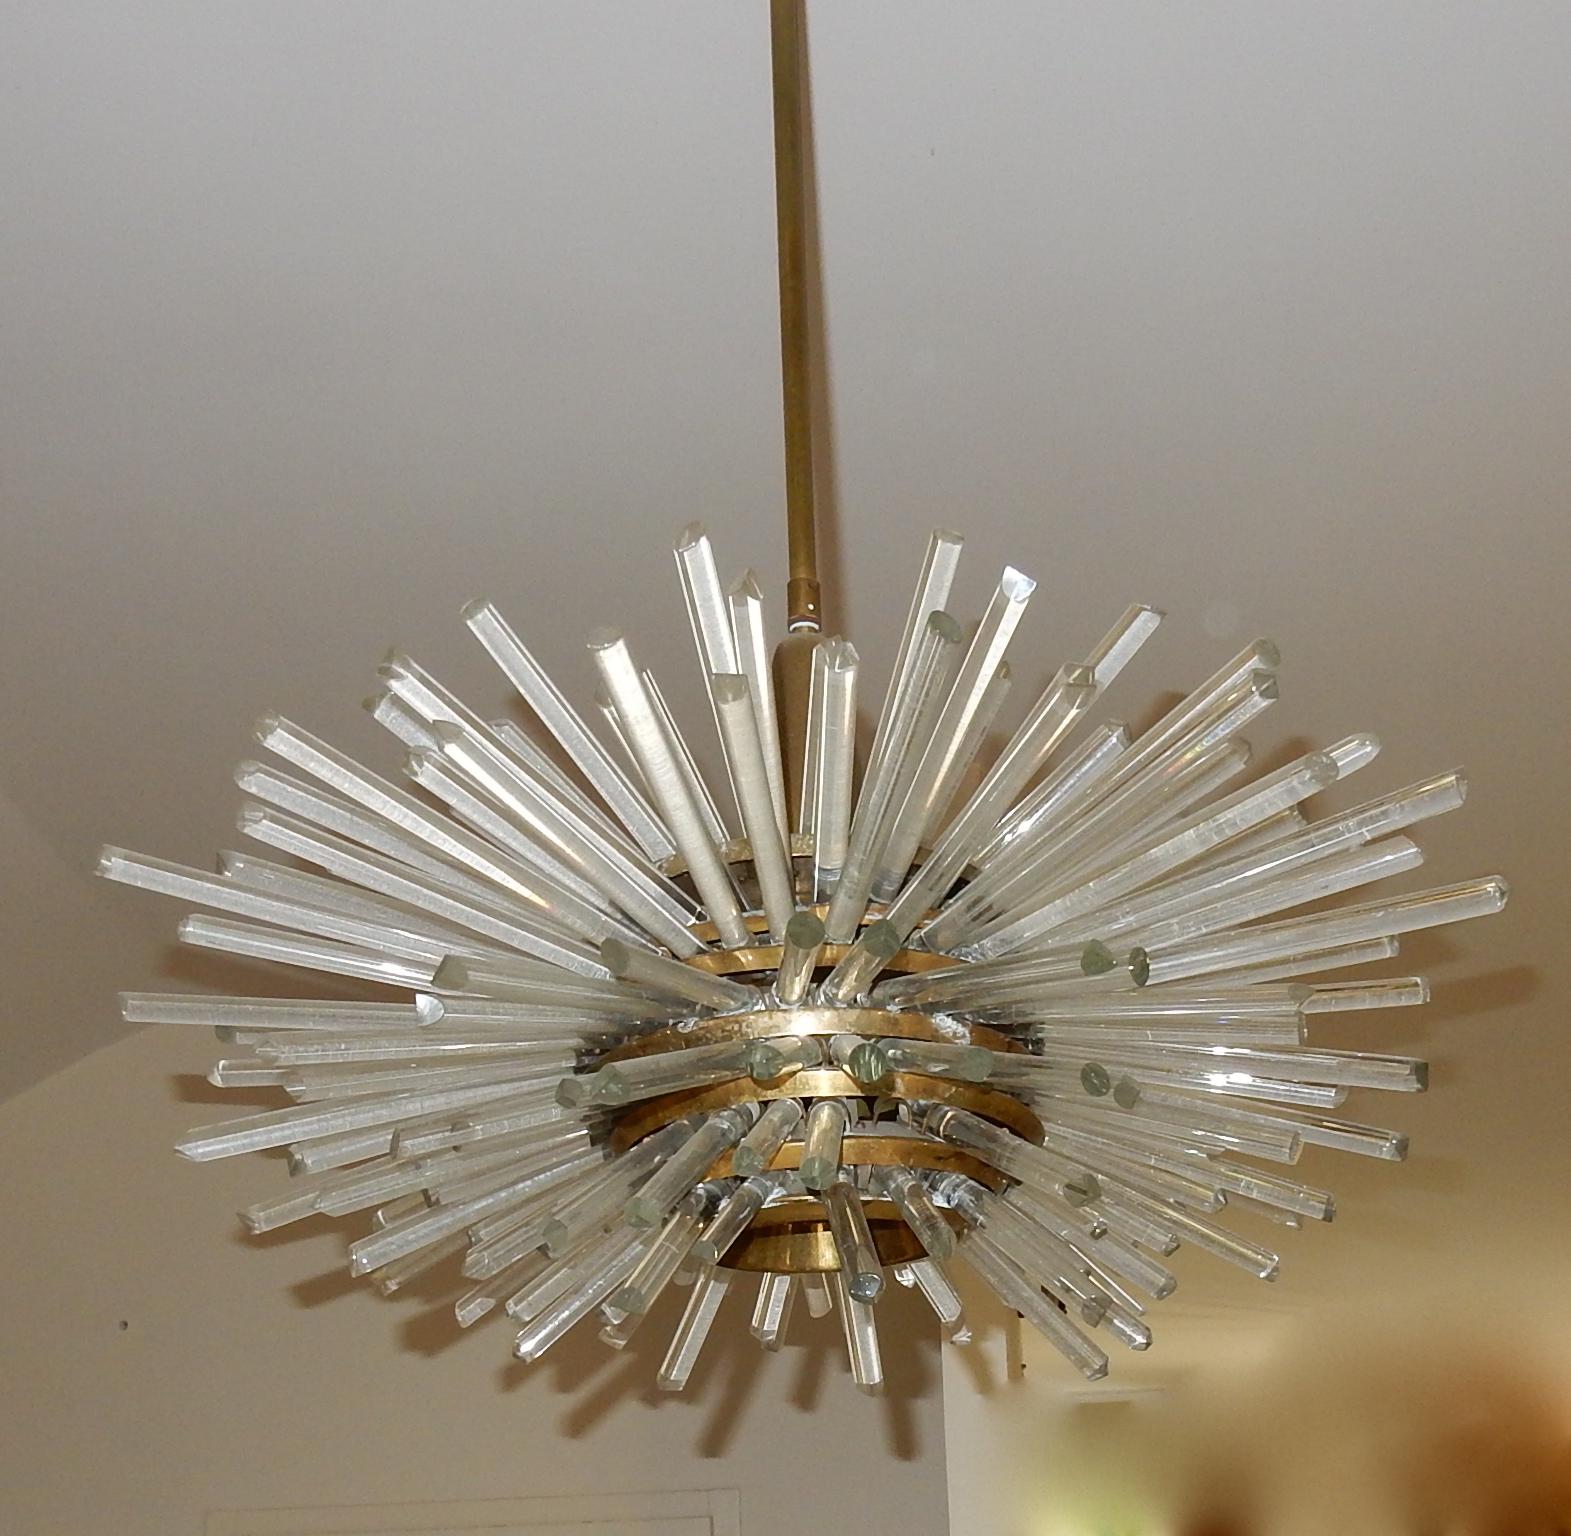 Austrian chandelier,
Manufacturer: Bakalowits & Söhne Model: Luster Miracle Designer: Friedl Bakalowits
Materials: glass or crystal and brass rods
Good condition
Sizes: 67 cm in diameter H: 90 cm Without the stem height: 35 cm,
Circa 1965.